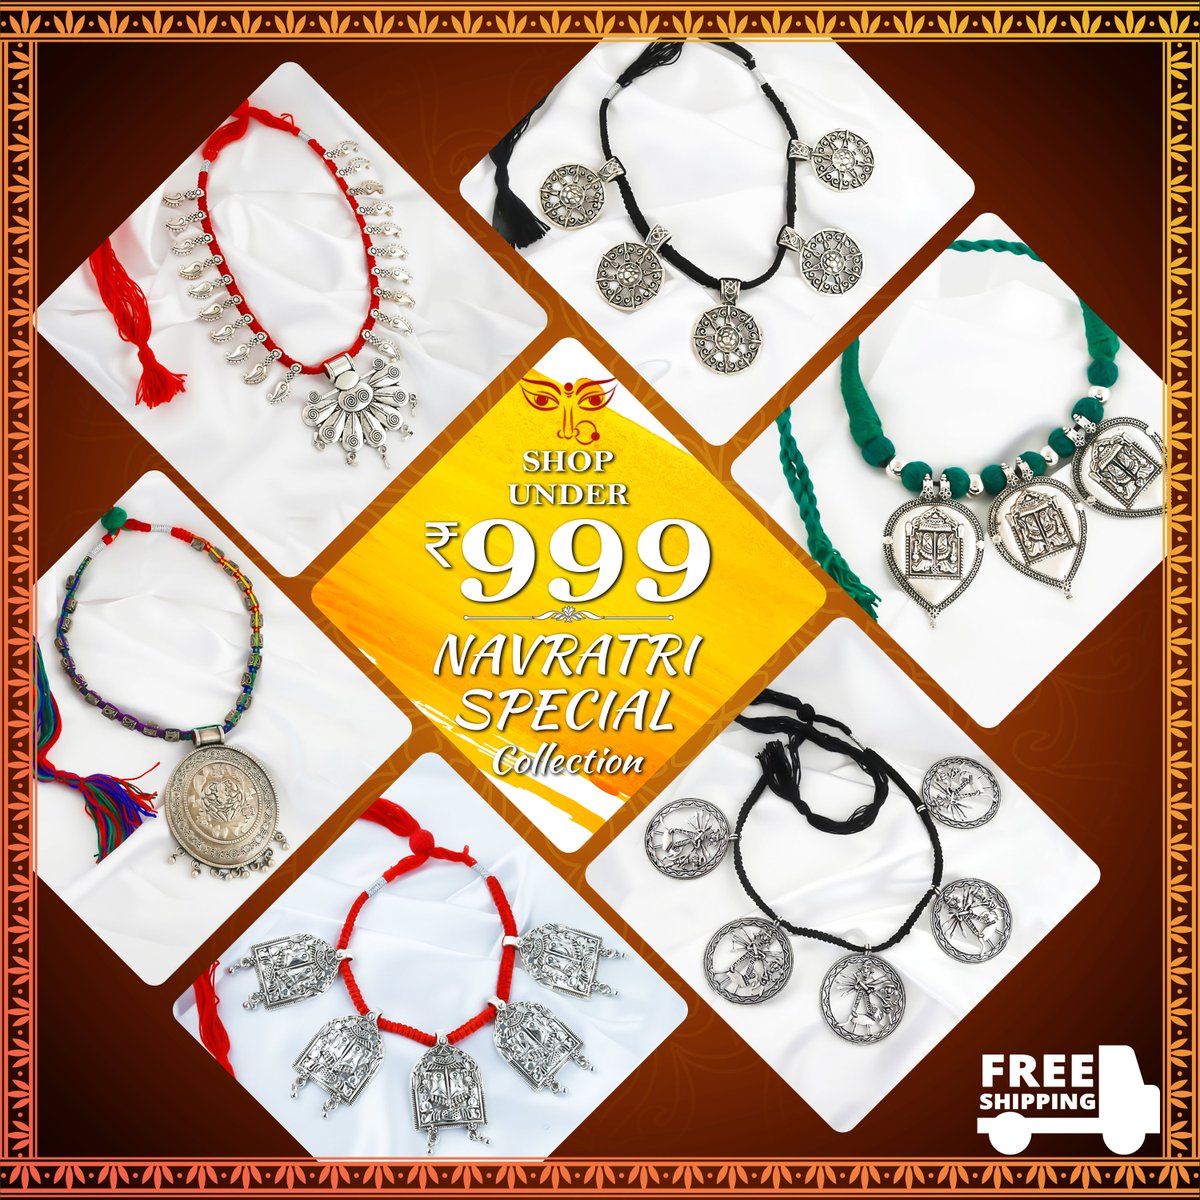 😍Deal of The Day 😍
🤩Shop Under Rs.999/- 🤩
💃Navratri Special Necklace 💃 
🥳Get It Now: bit.ly/36dNHqQ
-
-
-
#oxidisedjewellery #navratrijewellery #navratrinecklace #oxidizedjewellery #fashionjewellery #jewelleryonline #artificialjewellery #anuradhaartjewellery